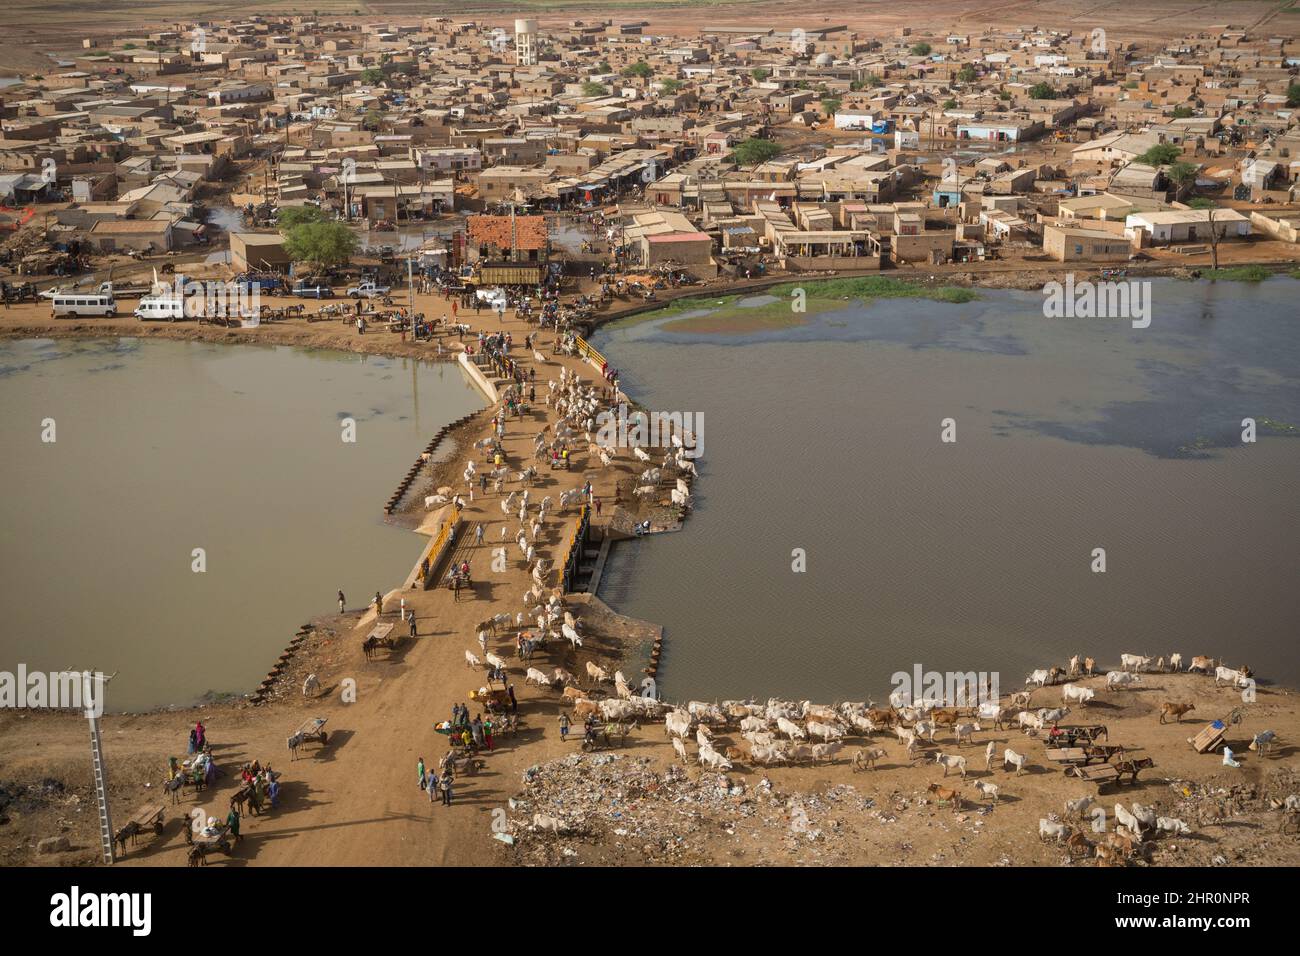 Floodgates at the town of Mboundoum along the Senegal River help regulate the flow of water to irrigation channels throughout the Senegal River Delta. Stock Photo